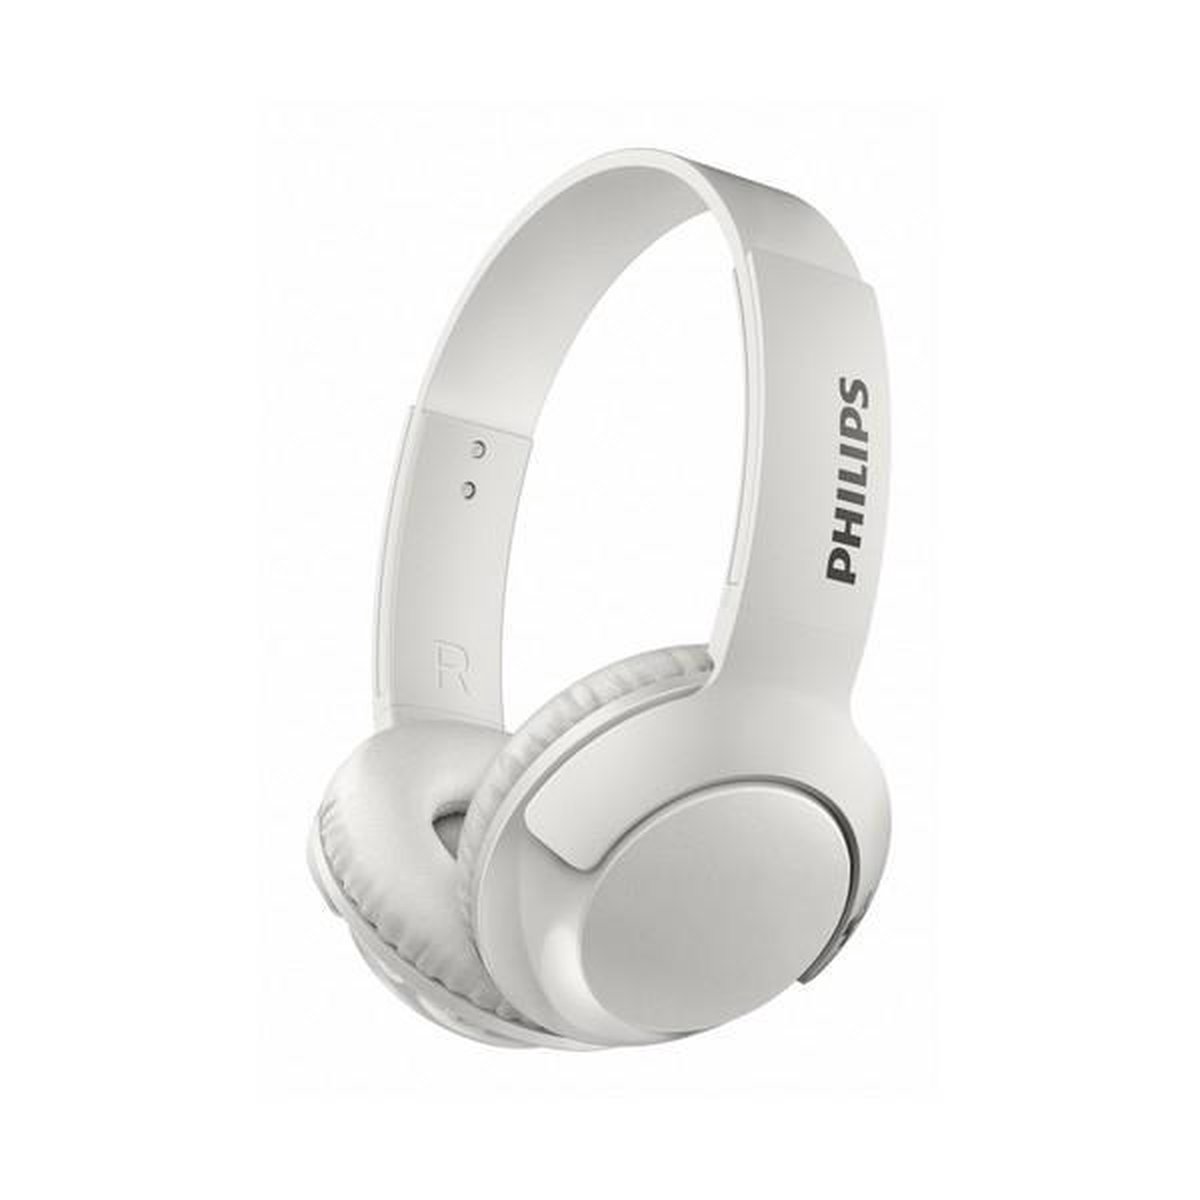 Philips Bass Plus Wireless Headphones Factory Sale, UP TO 54% OFF |  www.bel-cashmere.com